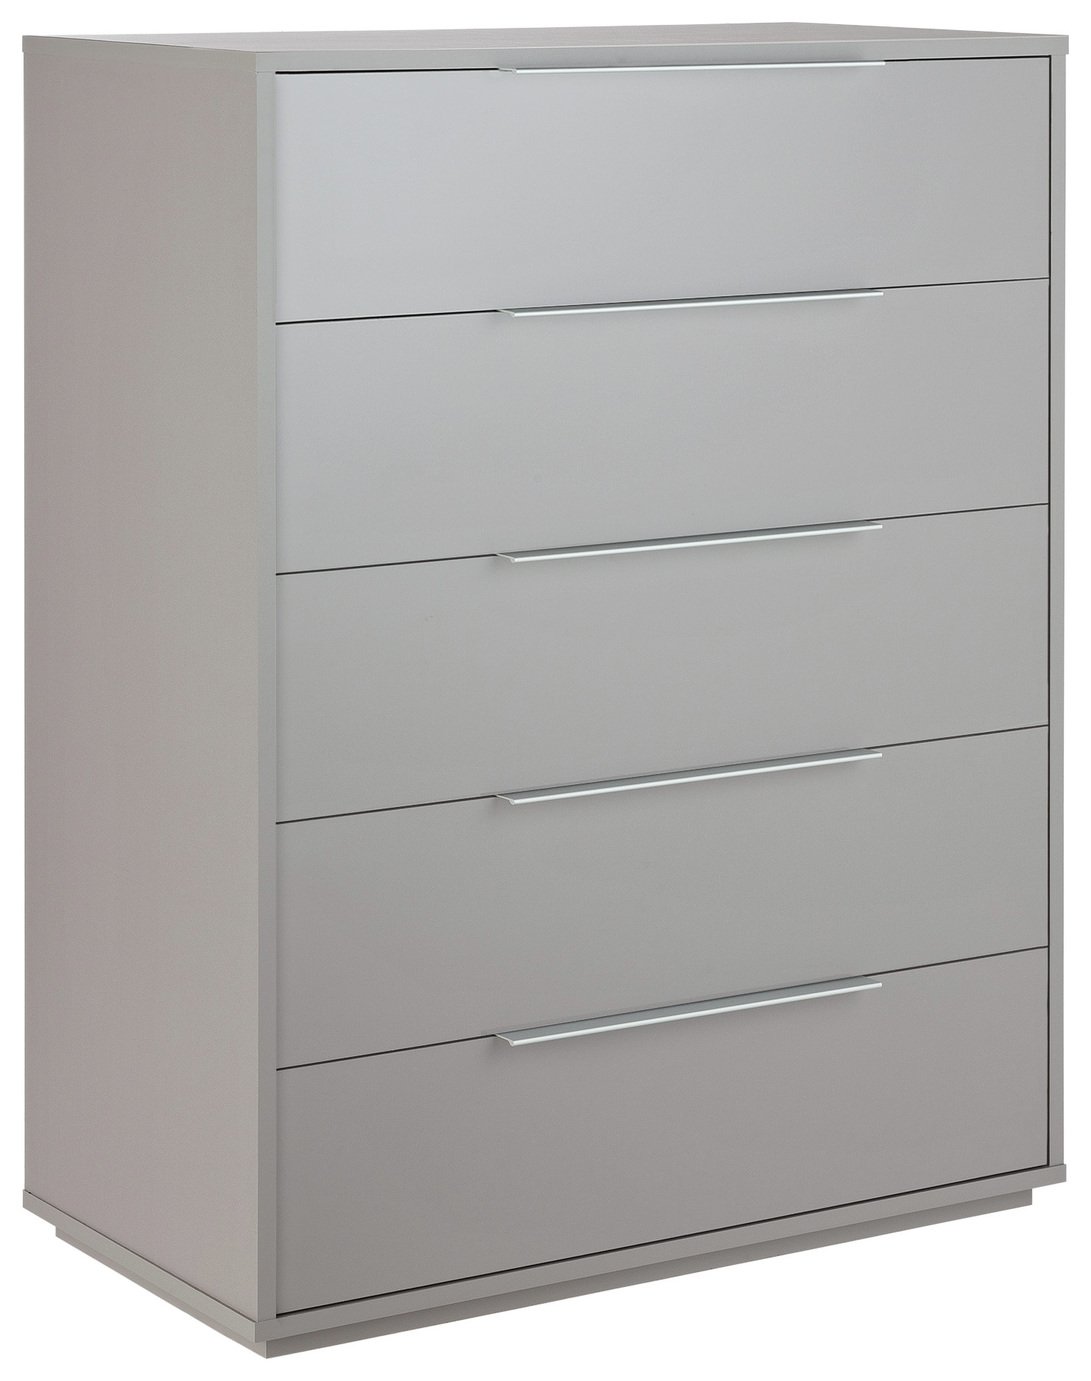 Argos Home Holsted Gloss 2 Bedsides & 5 Drawer Set - Grey